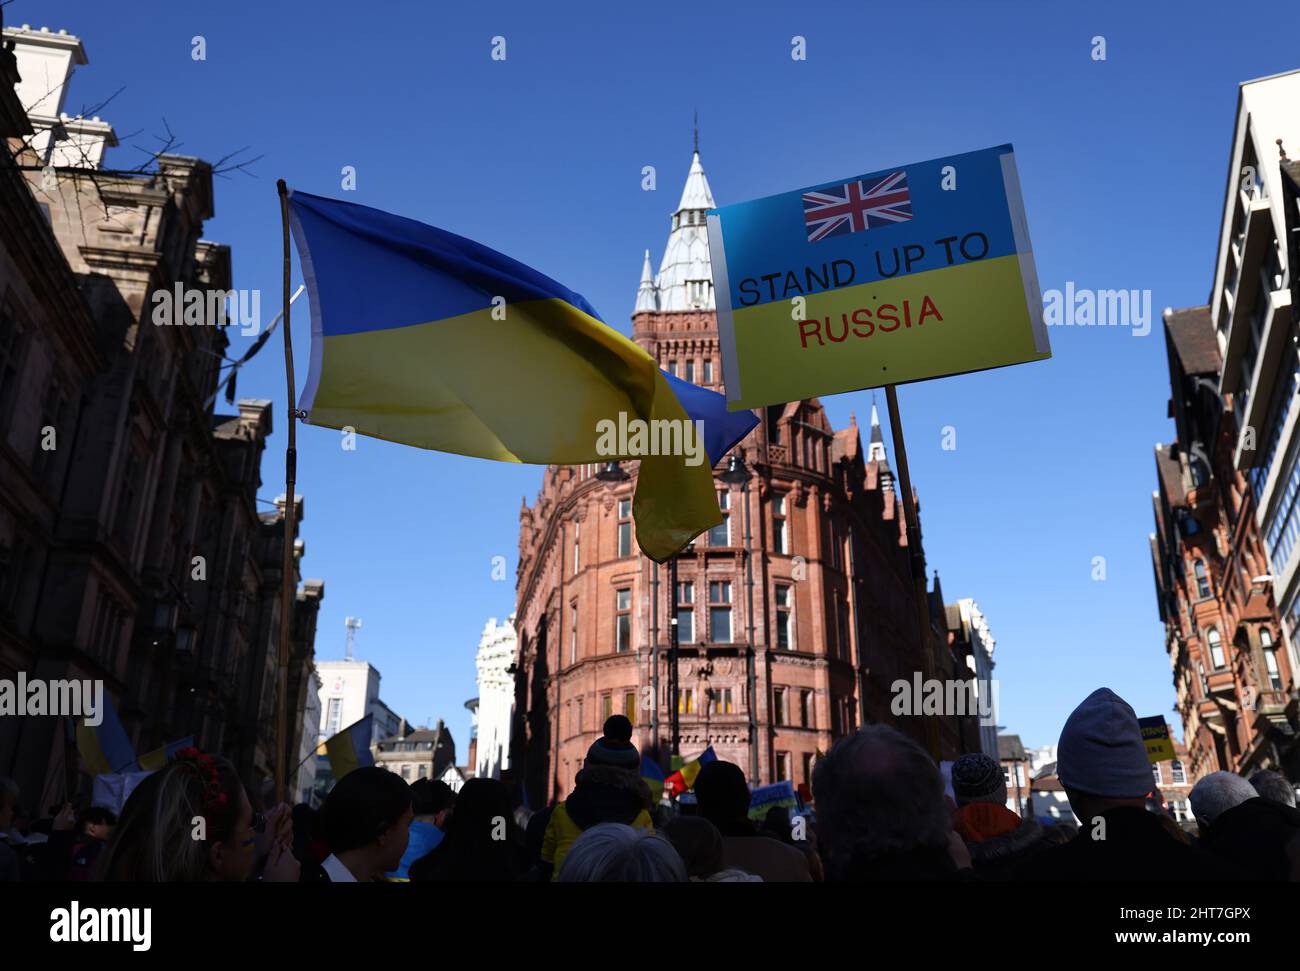 Nottingham, Nottinghamshire, UK. 27th February 2022. Demonstrators attend a vigil after Russian President Vladimir Putin ordered the invasion of Ukraine. Hundreds of people gathered in Old Market Square to show support to Ukrainian people. Credit Darren Staples/Alamy Live News. Stock Photo